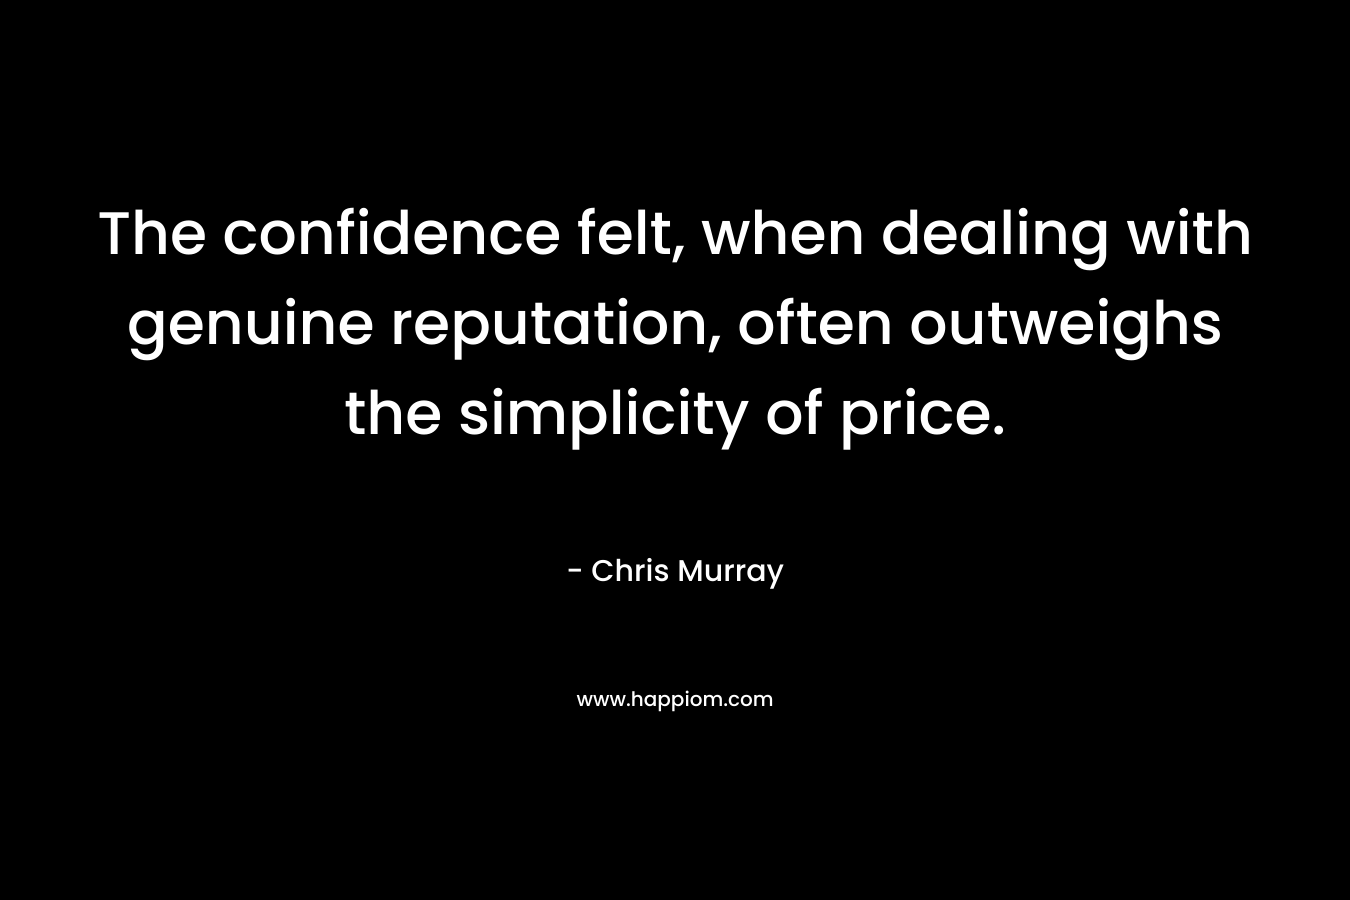 The confidence felt, when dealing with genuine reputation, often outweighs the simplicity of price.